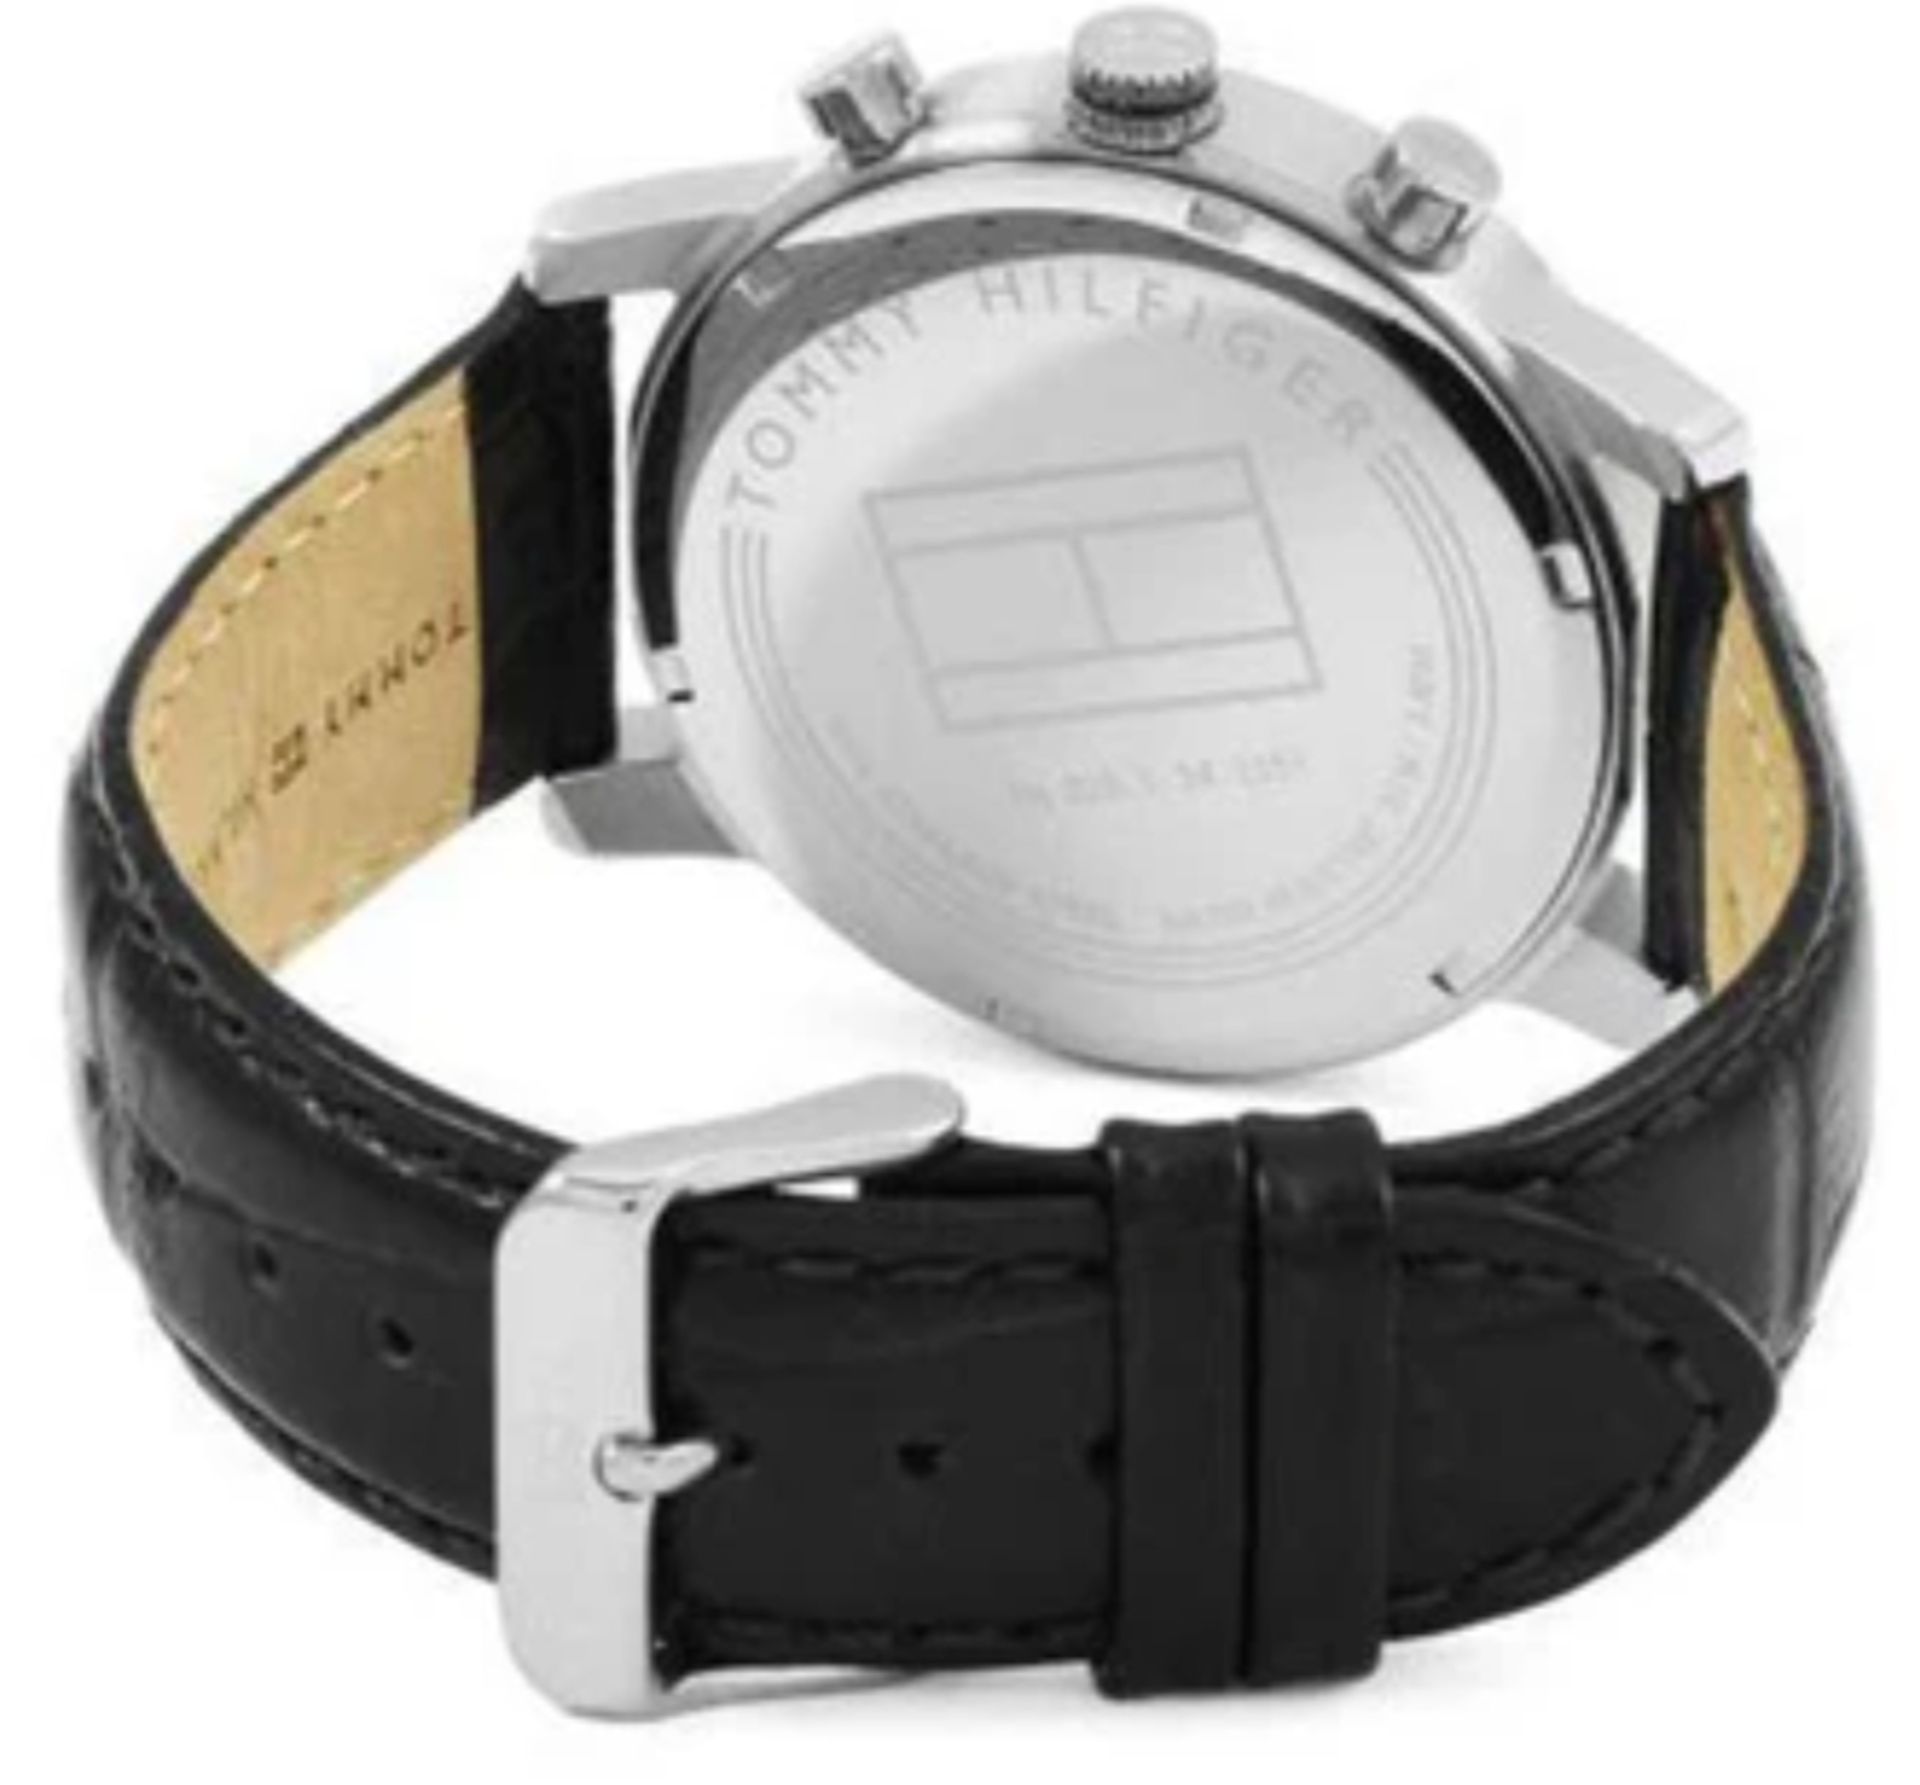 Tommy Hilfiger 1791401 Kane Chronograph Leather Watch In Black - Image 3 of 6